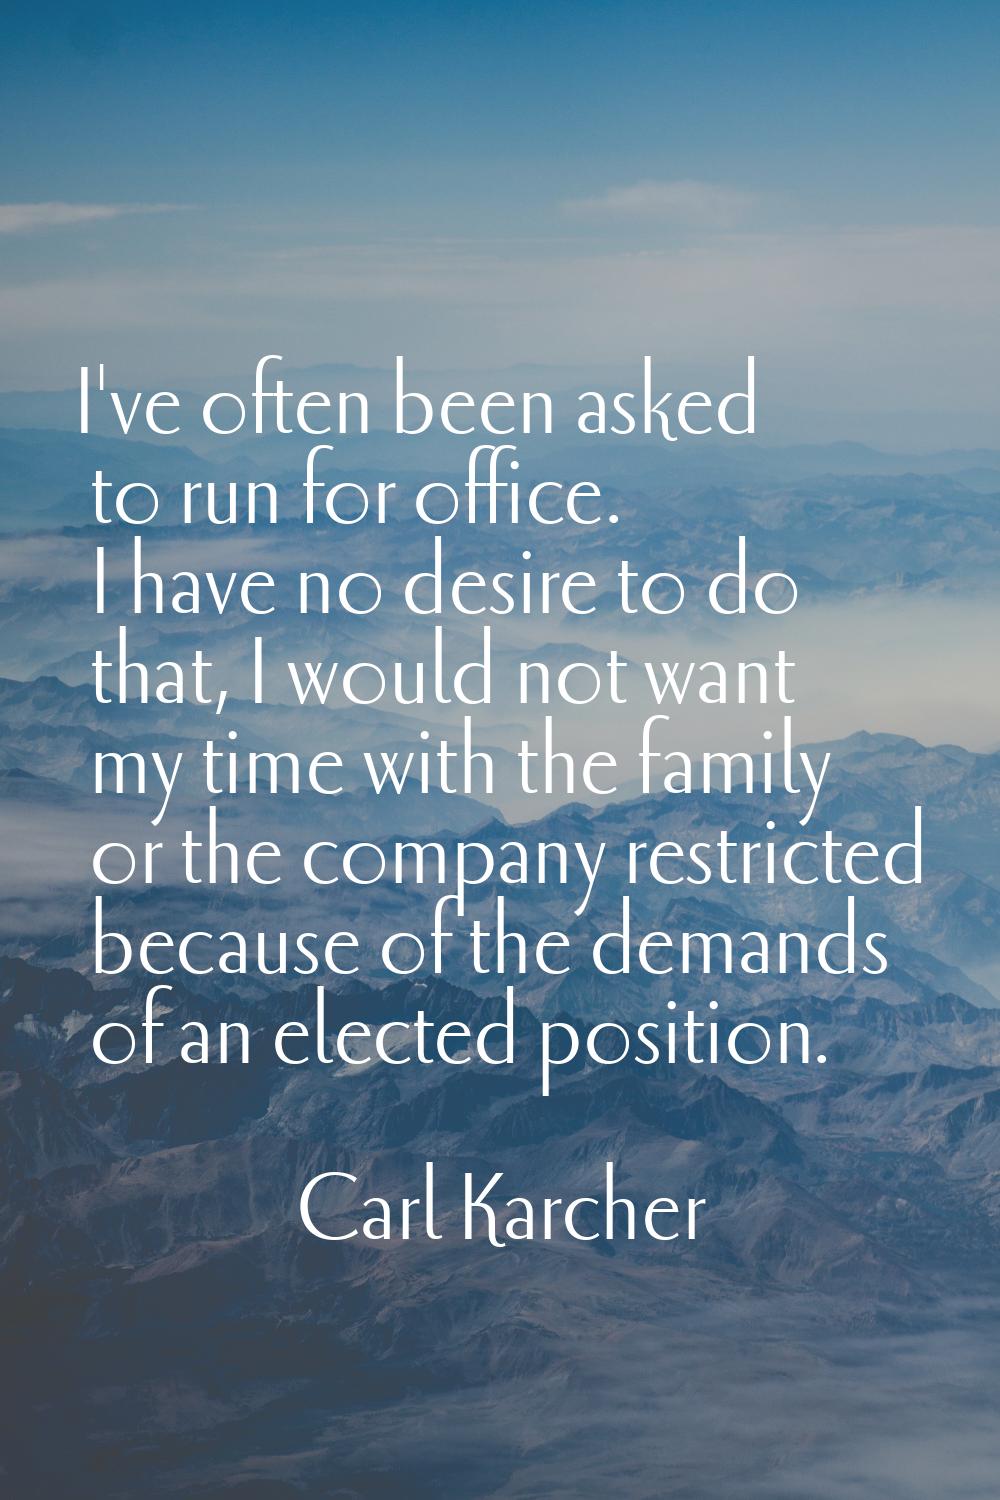 I've often been asked to run for office. I have no desire to do that, I would not want my time with